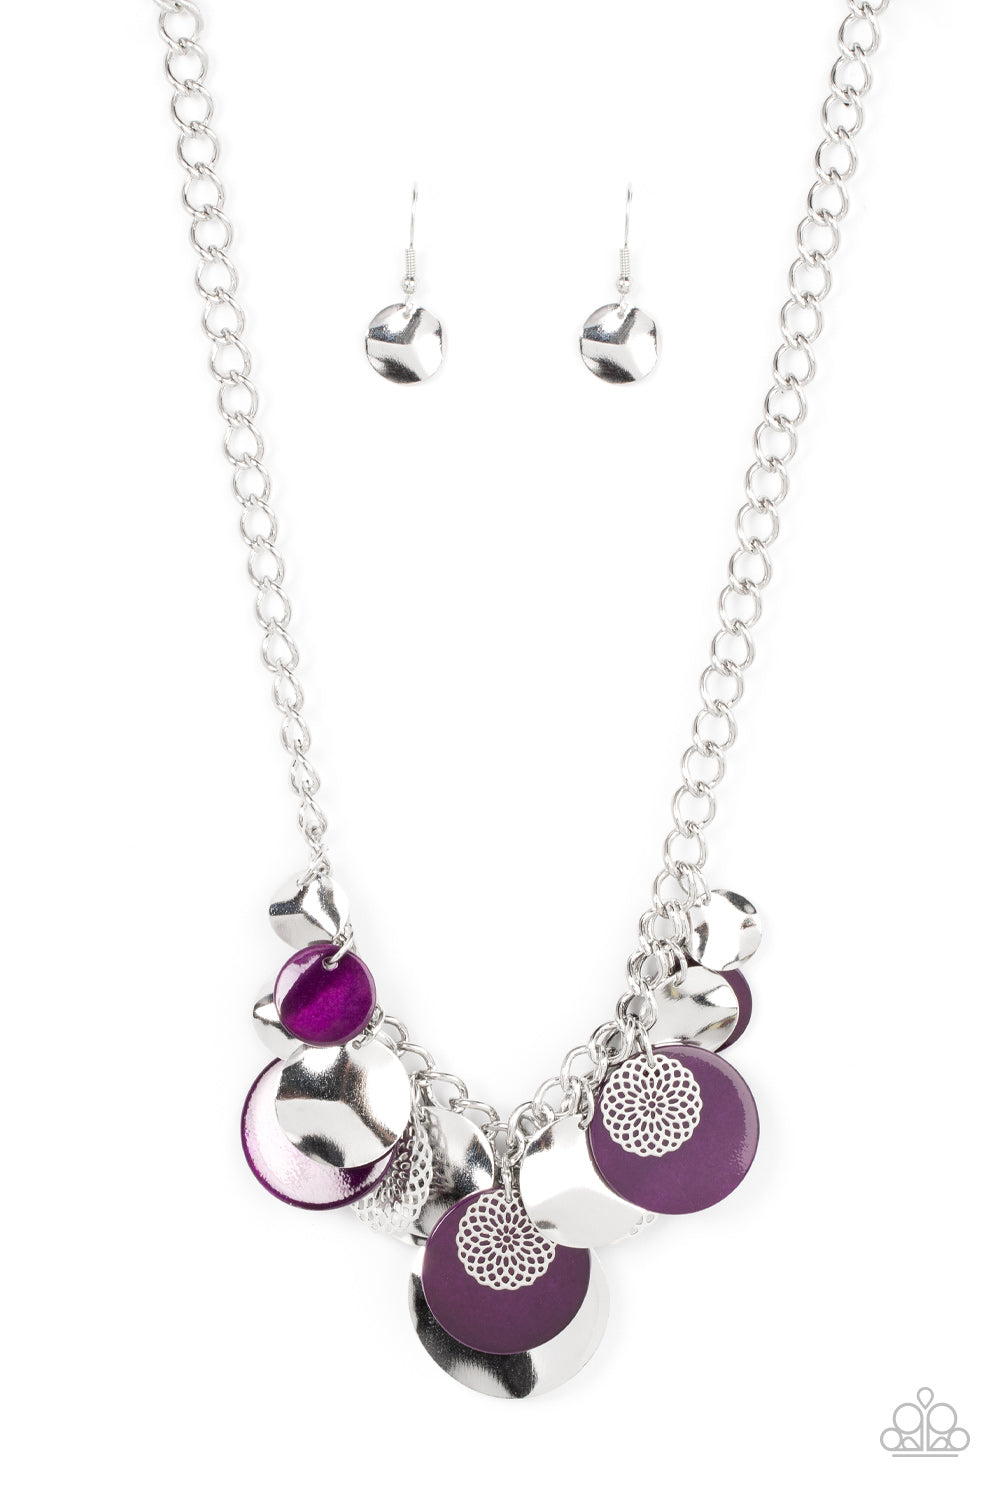 Paparazzi Accessories - Oceanic Opera - Purple Necklaces a summery collection of bent silver discs, plum shell-like discs, and silver mandala-like accents cascades from a pair of layered silver chains, resulting in a bubbly and boisterous fringe below the collar. Features an adjustable clasp closure.  Sold as one individual necklace. Includes one pair of matching earrings.